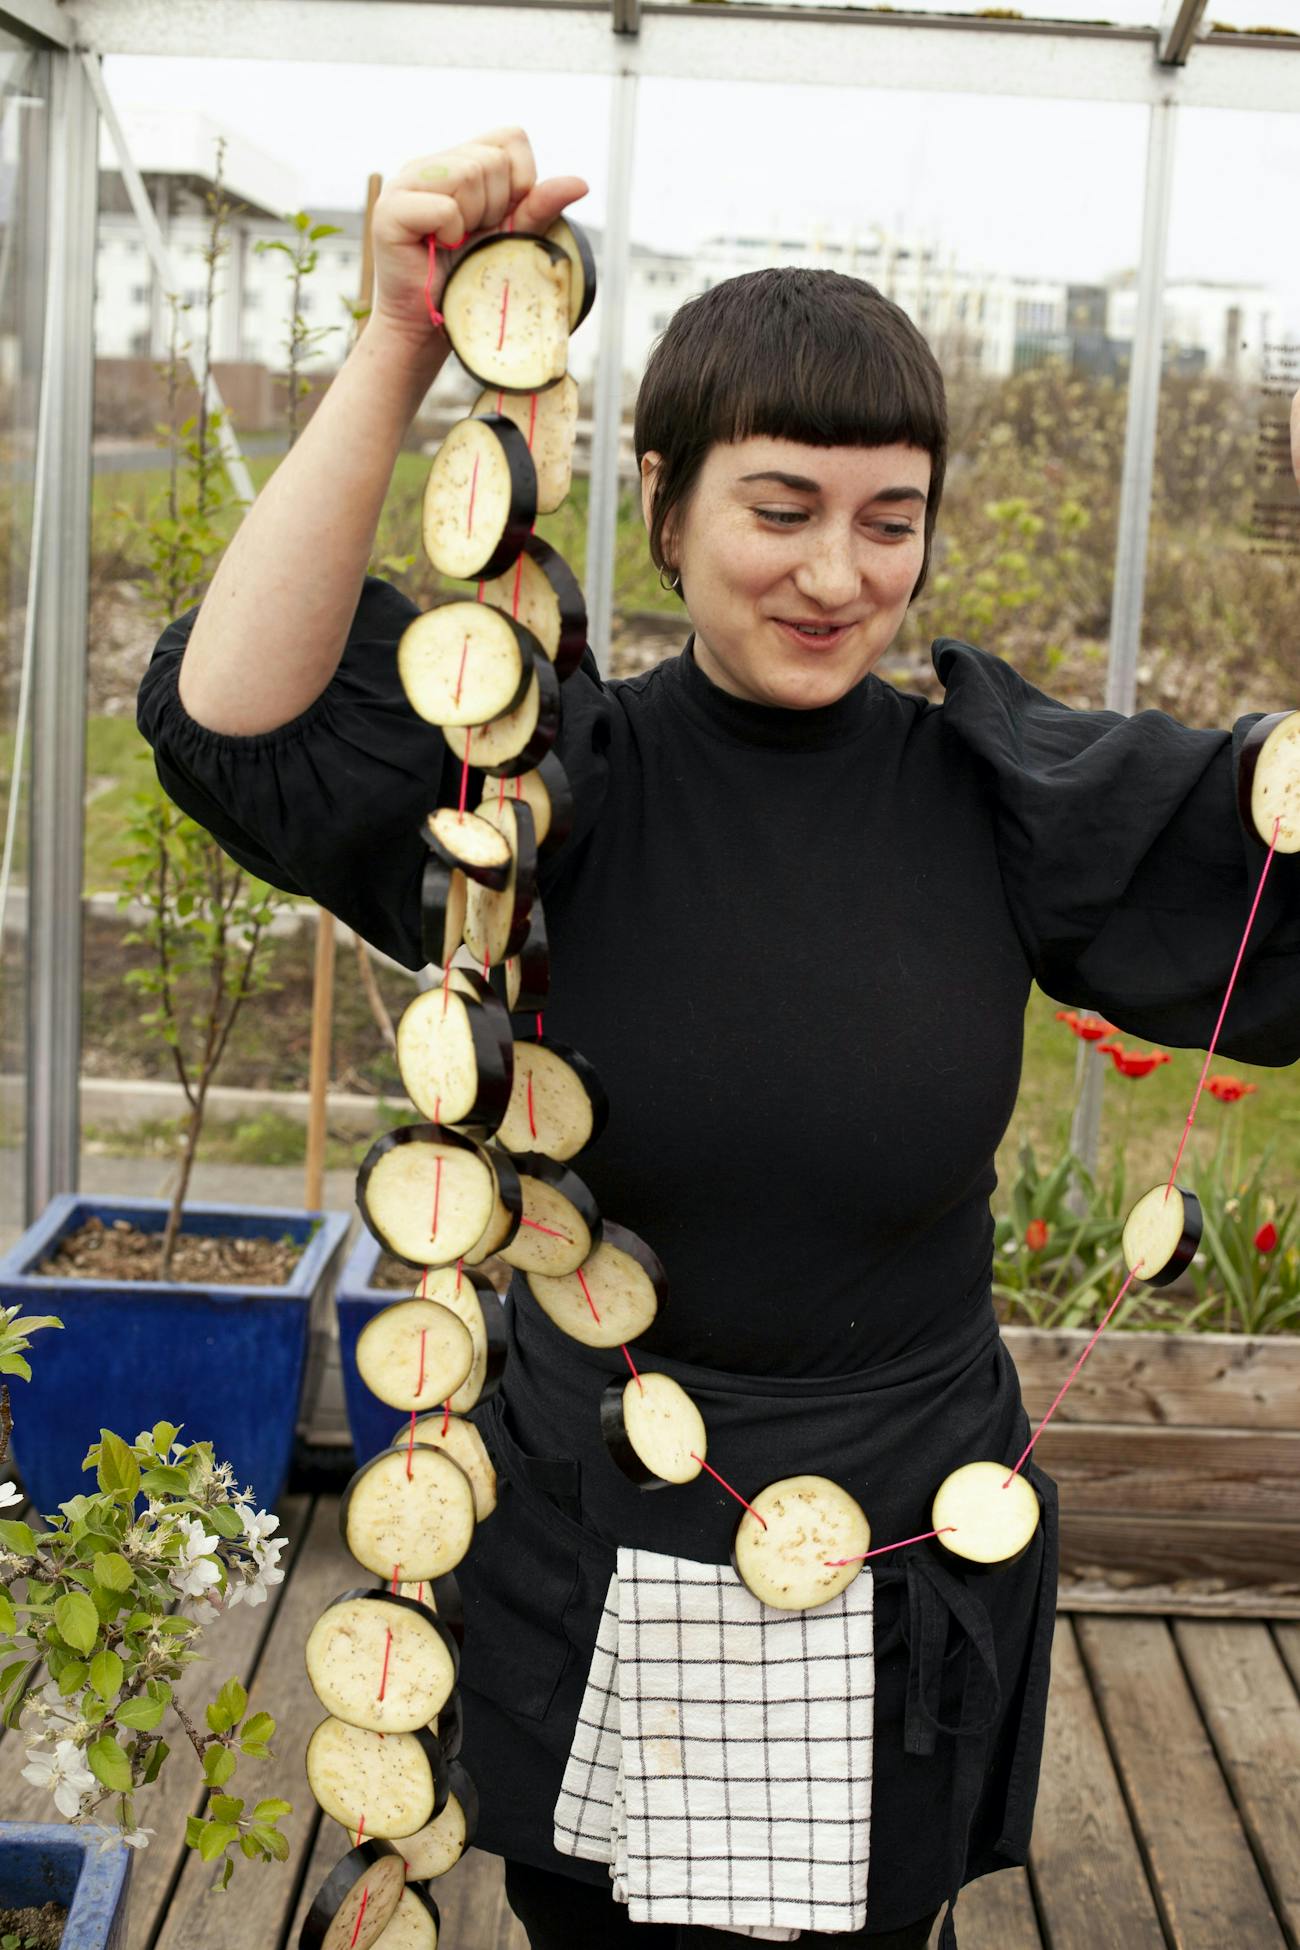 Pola Sutryk is in a greenhouse. Pola has short dark hair and wears a black dress and an apron with a kitchen towel hanging from it. Pola is holding a wreath made of eggplant slices and red thread. Pola smiles.